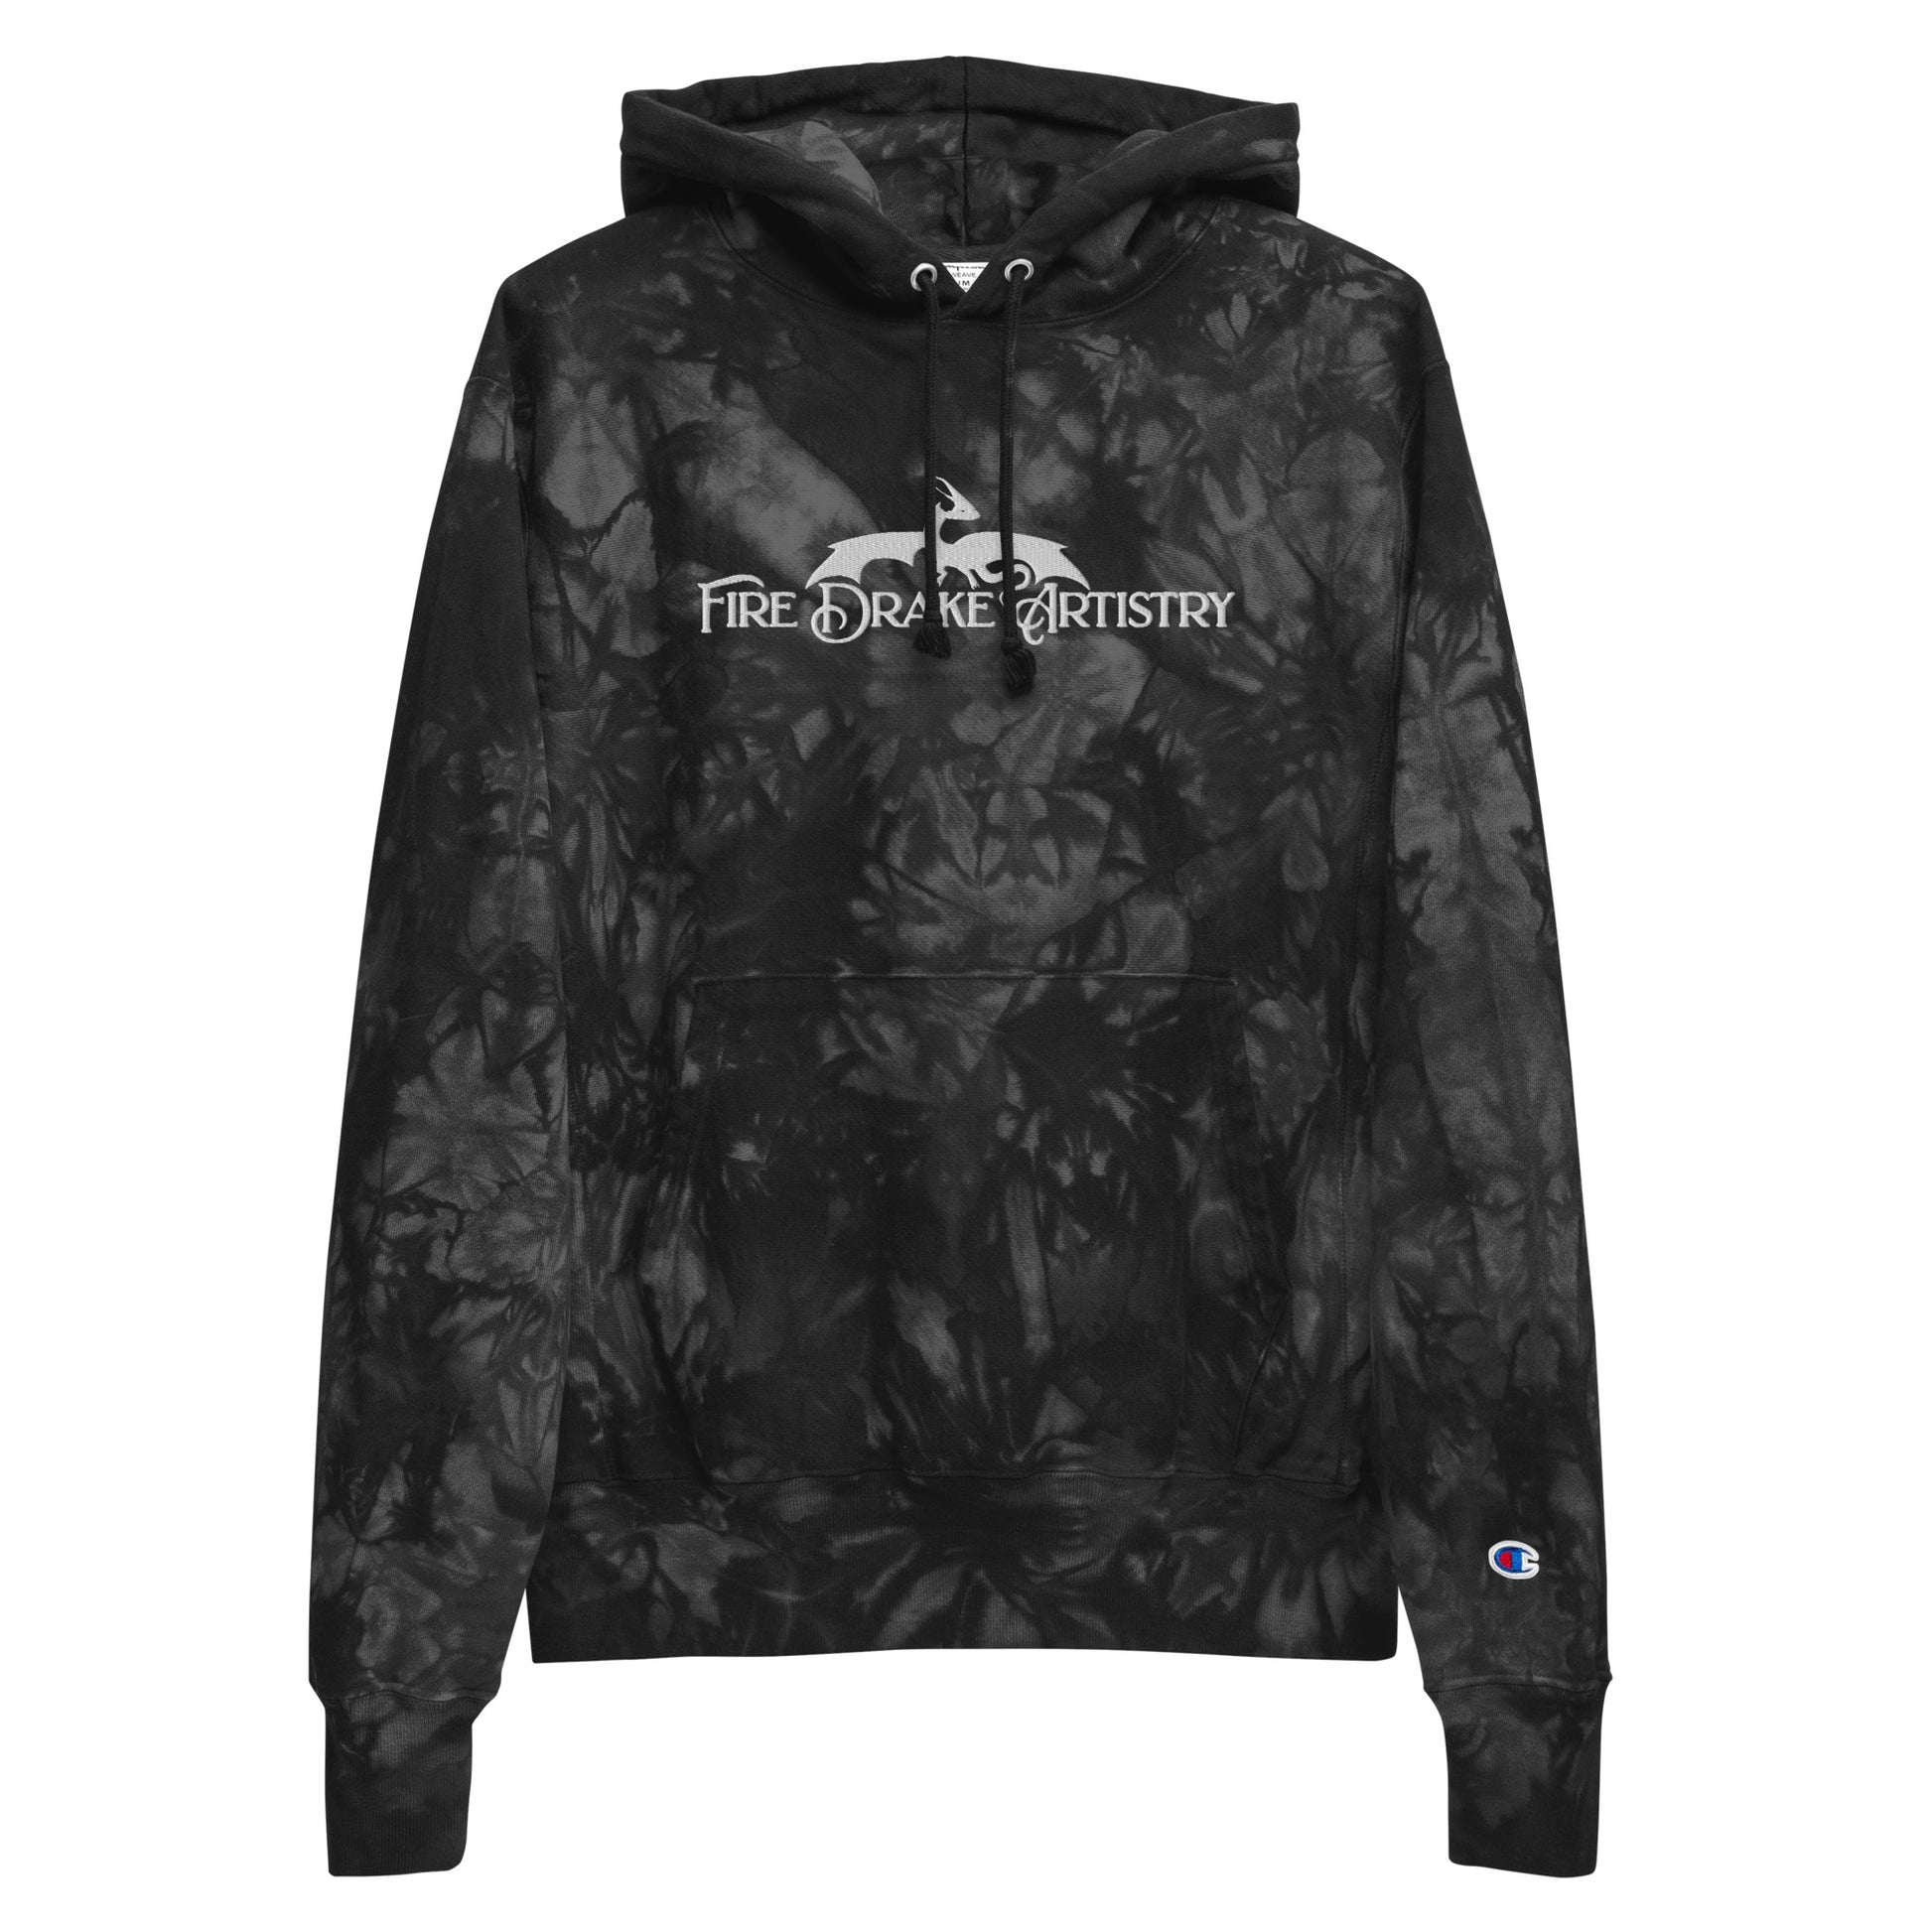 Fire Drake Artistry™ Unisex Champion tie-dye hoodie (Large Embroidery) Merch™ for FireDrake Artistry